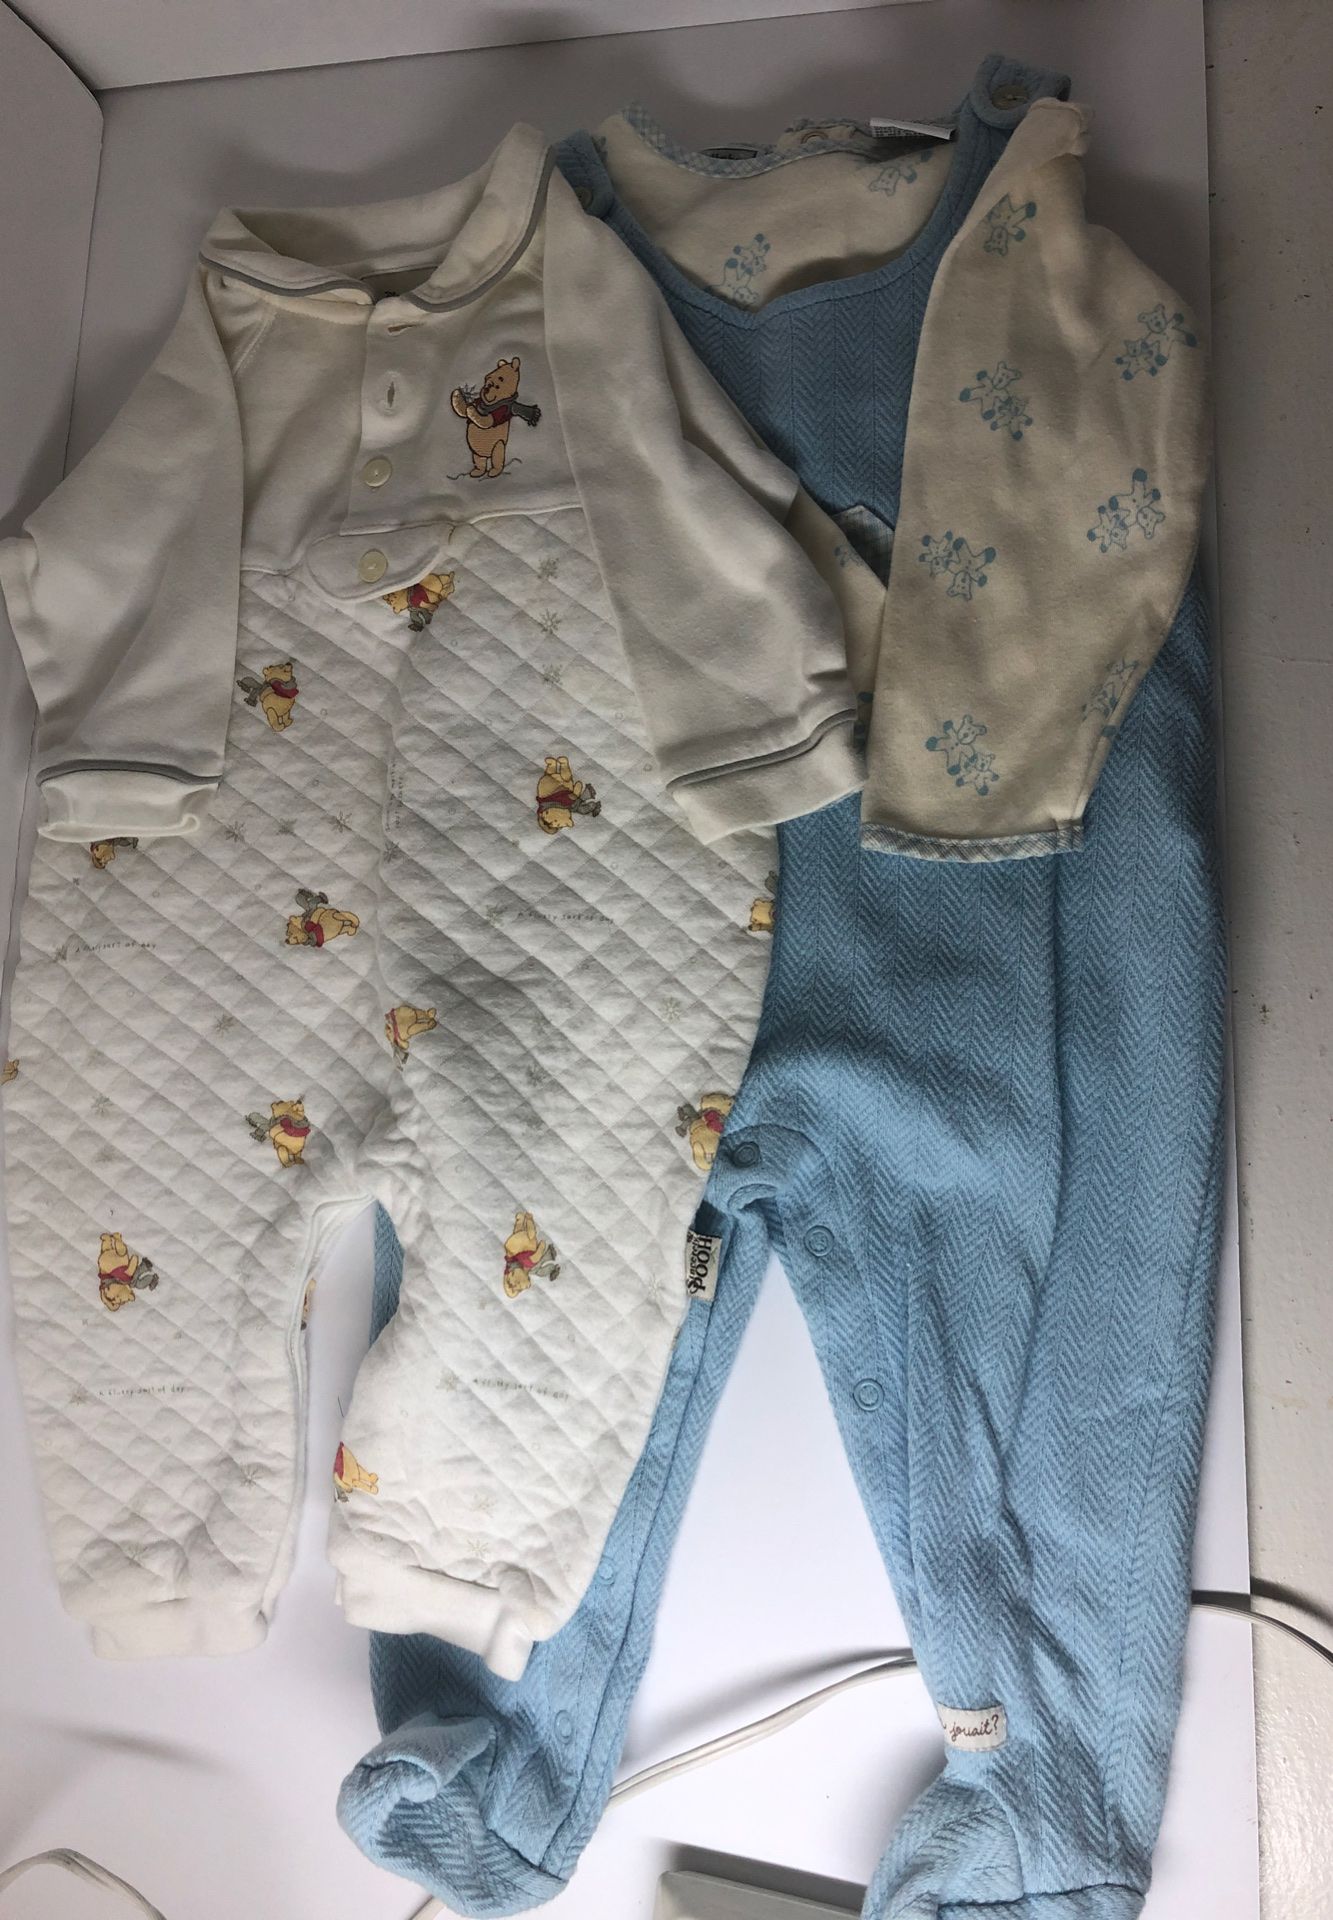 Clothes kids like Nautical Disney Sincerely and more Sz 6, 9, 24 M and 3 y